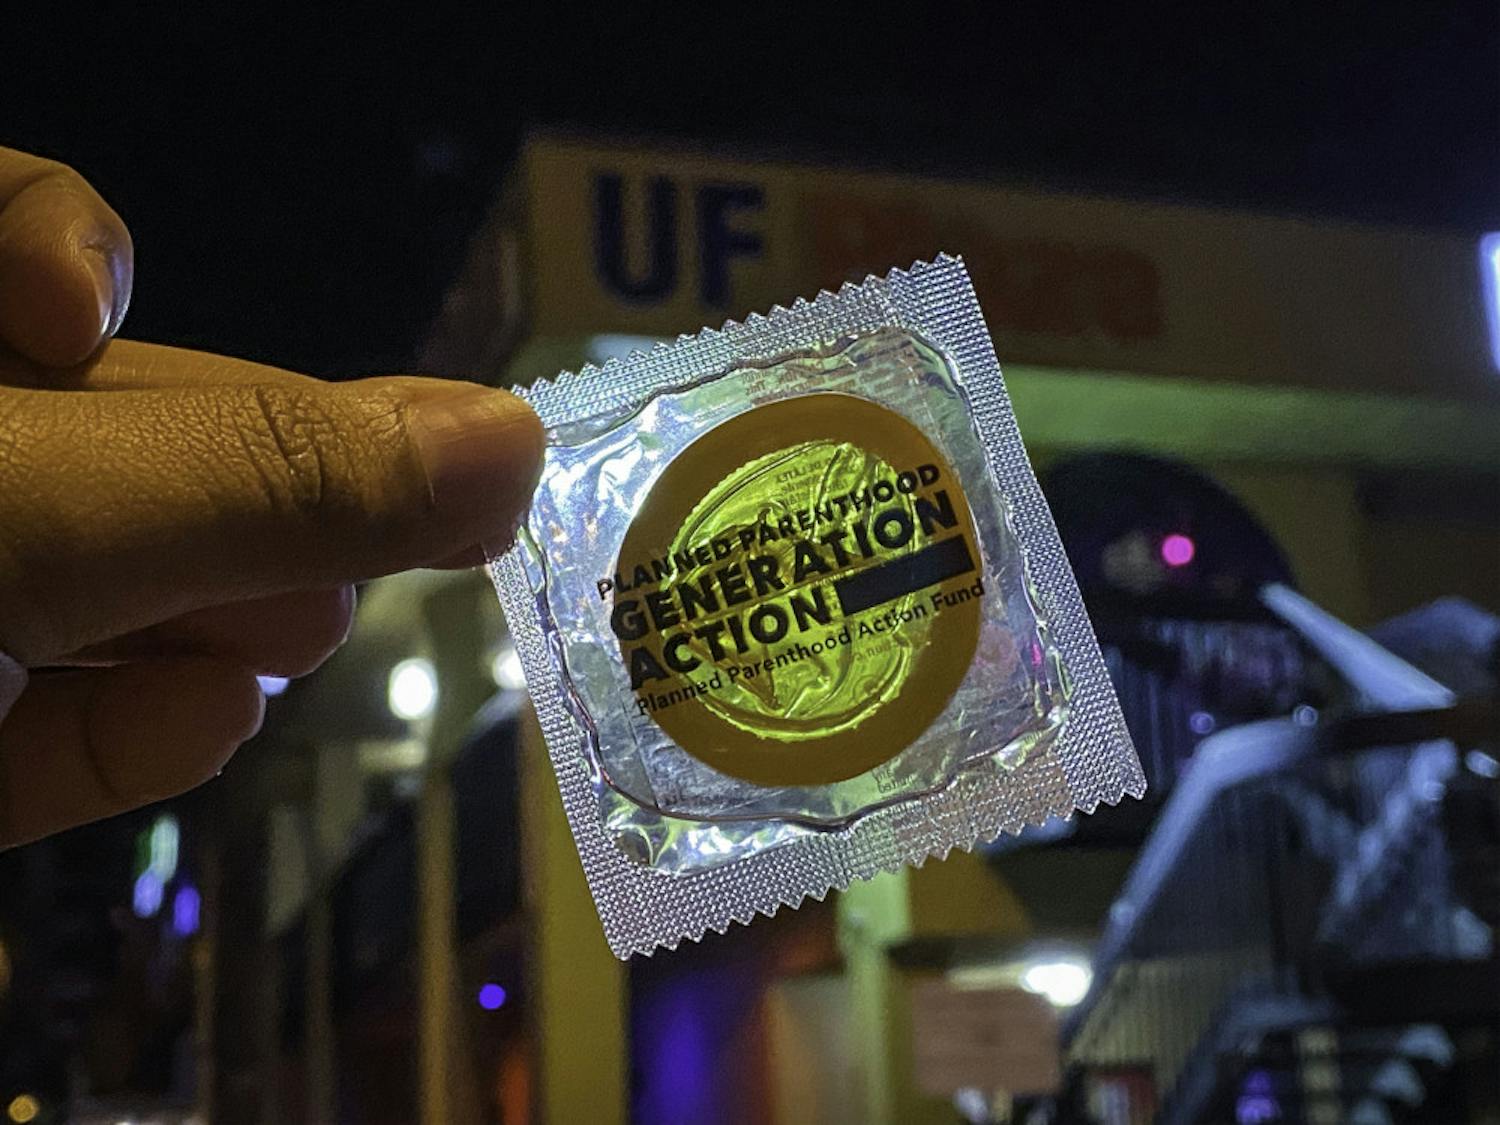 On Saturday night, Planned Parenthood Generation Action and the Women’s Student Association handed out condoms and other forms of protection to those in lines for bars at Midtown.